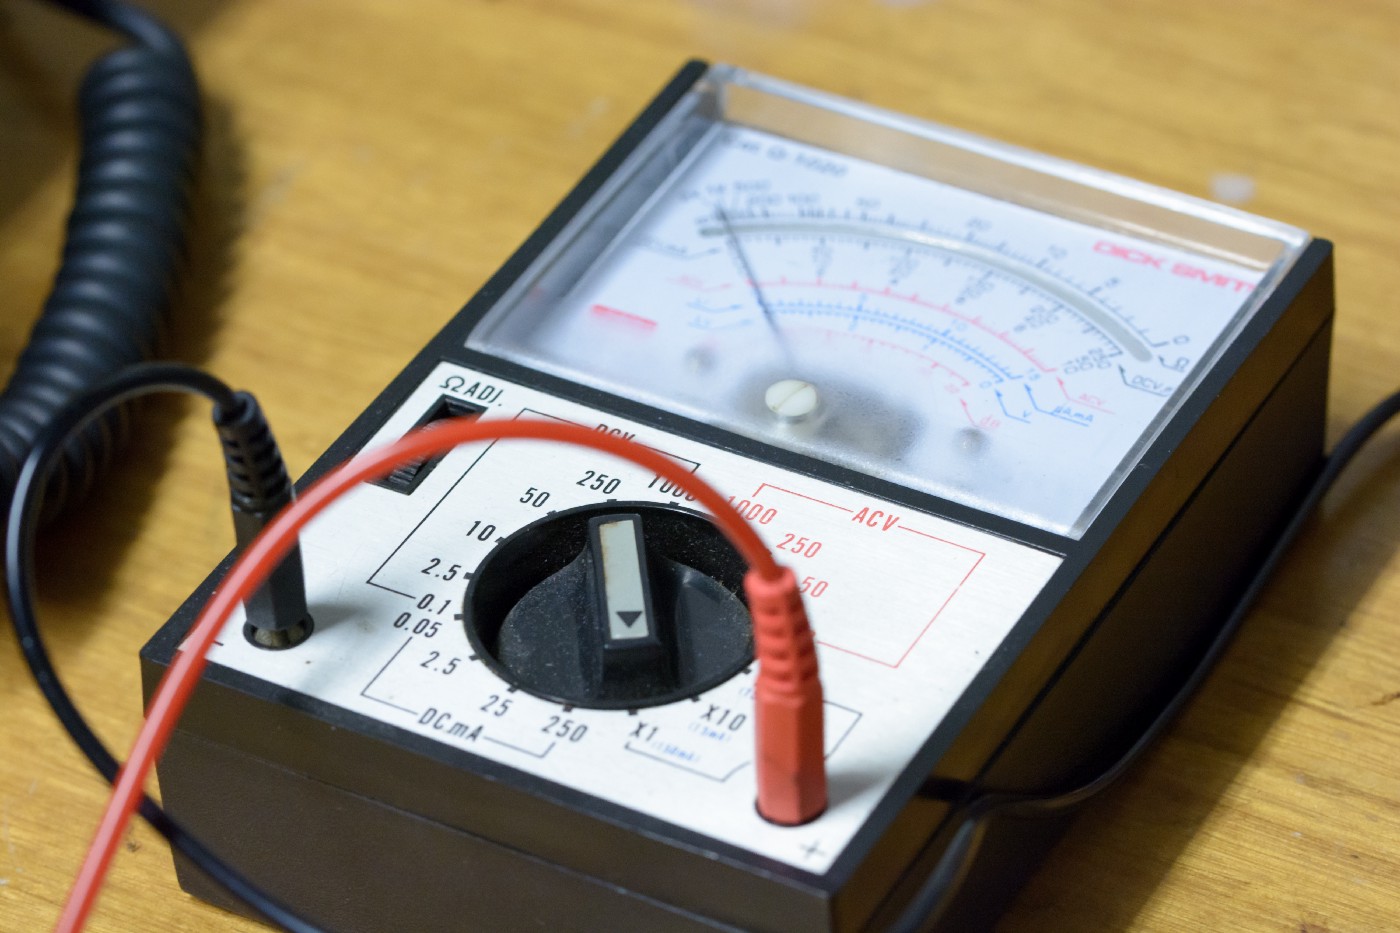 A close up image of an analog multimeter, with a red and a black test lead emerging from two ports.